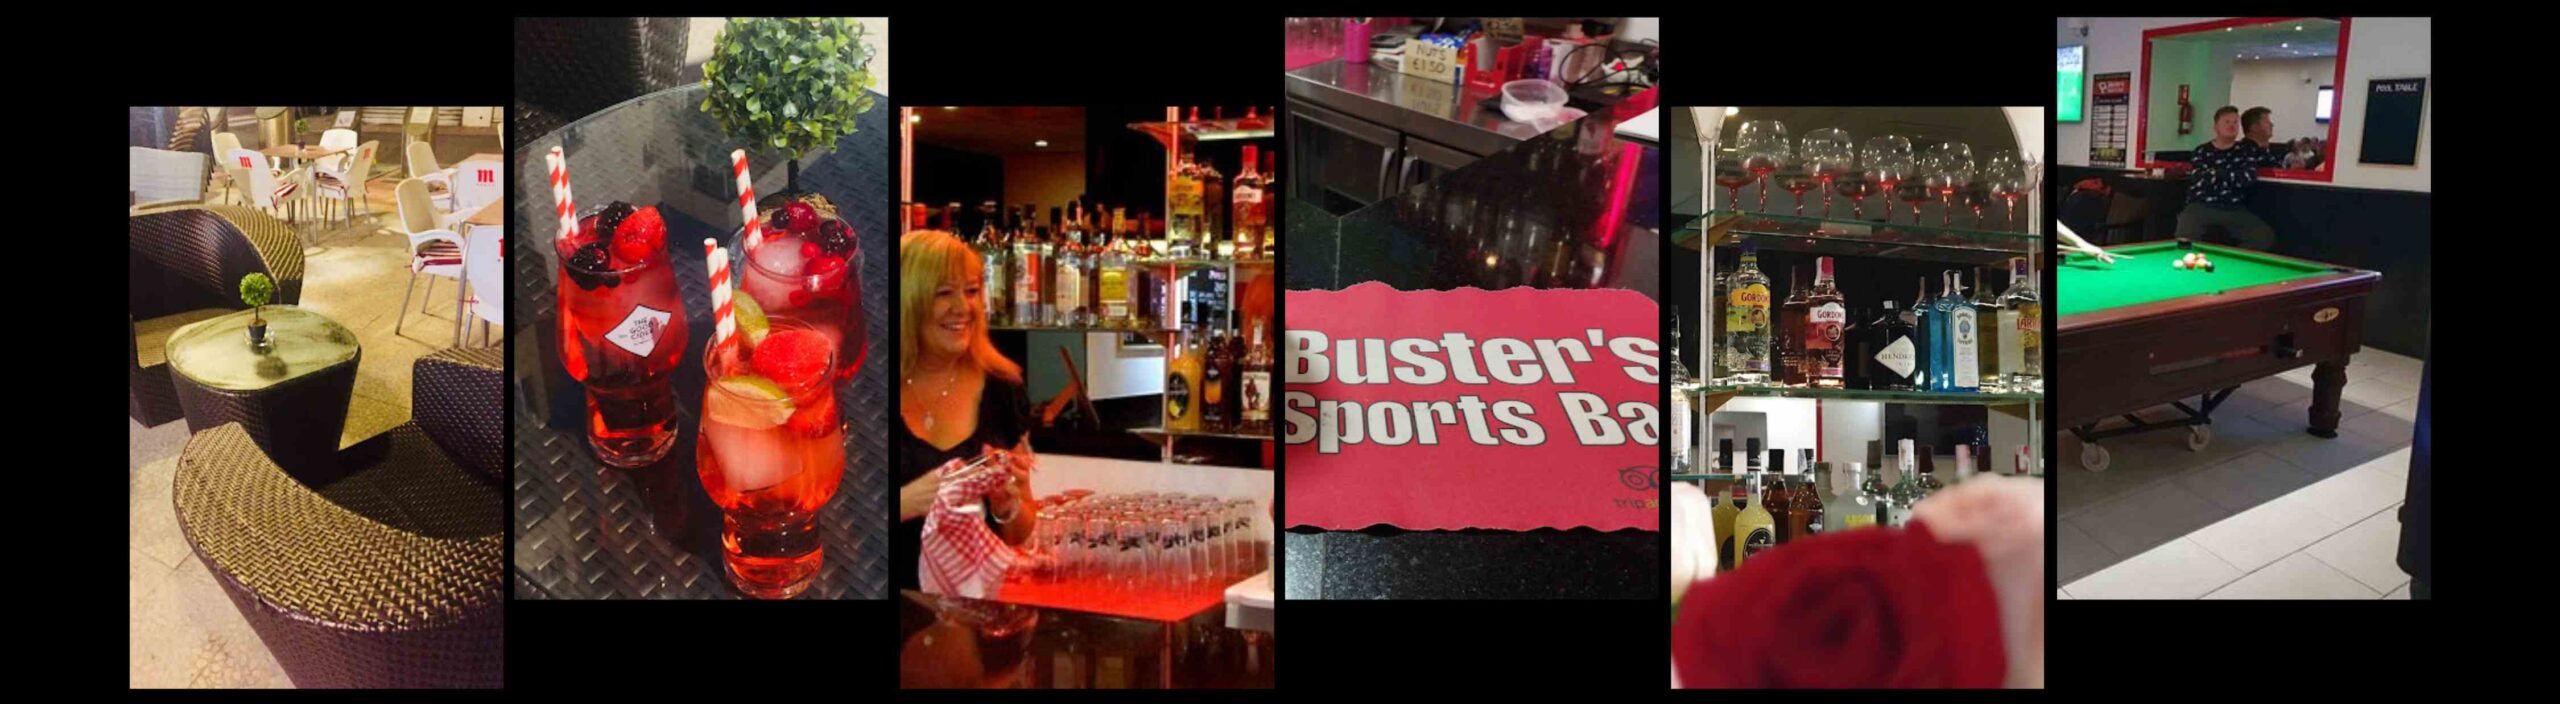 Buster's Sports Bar